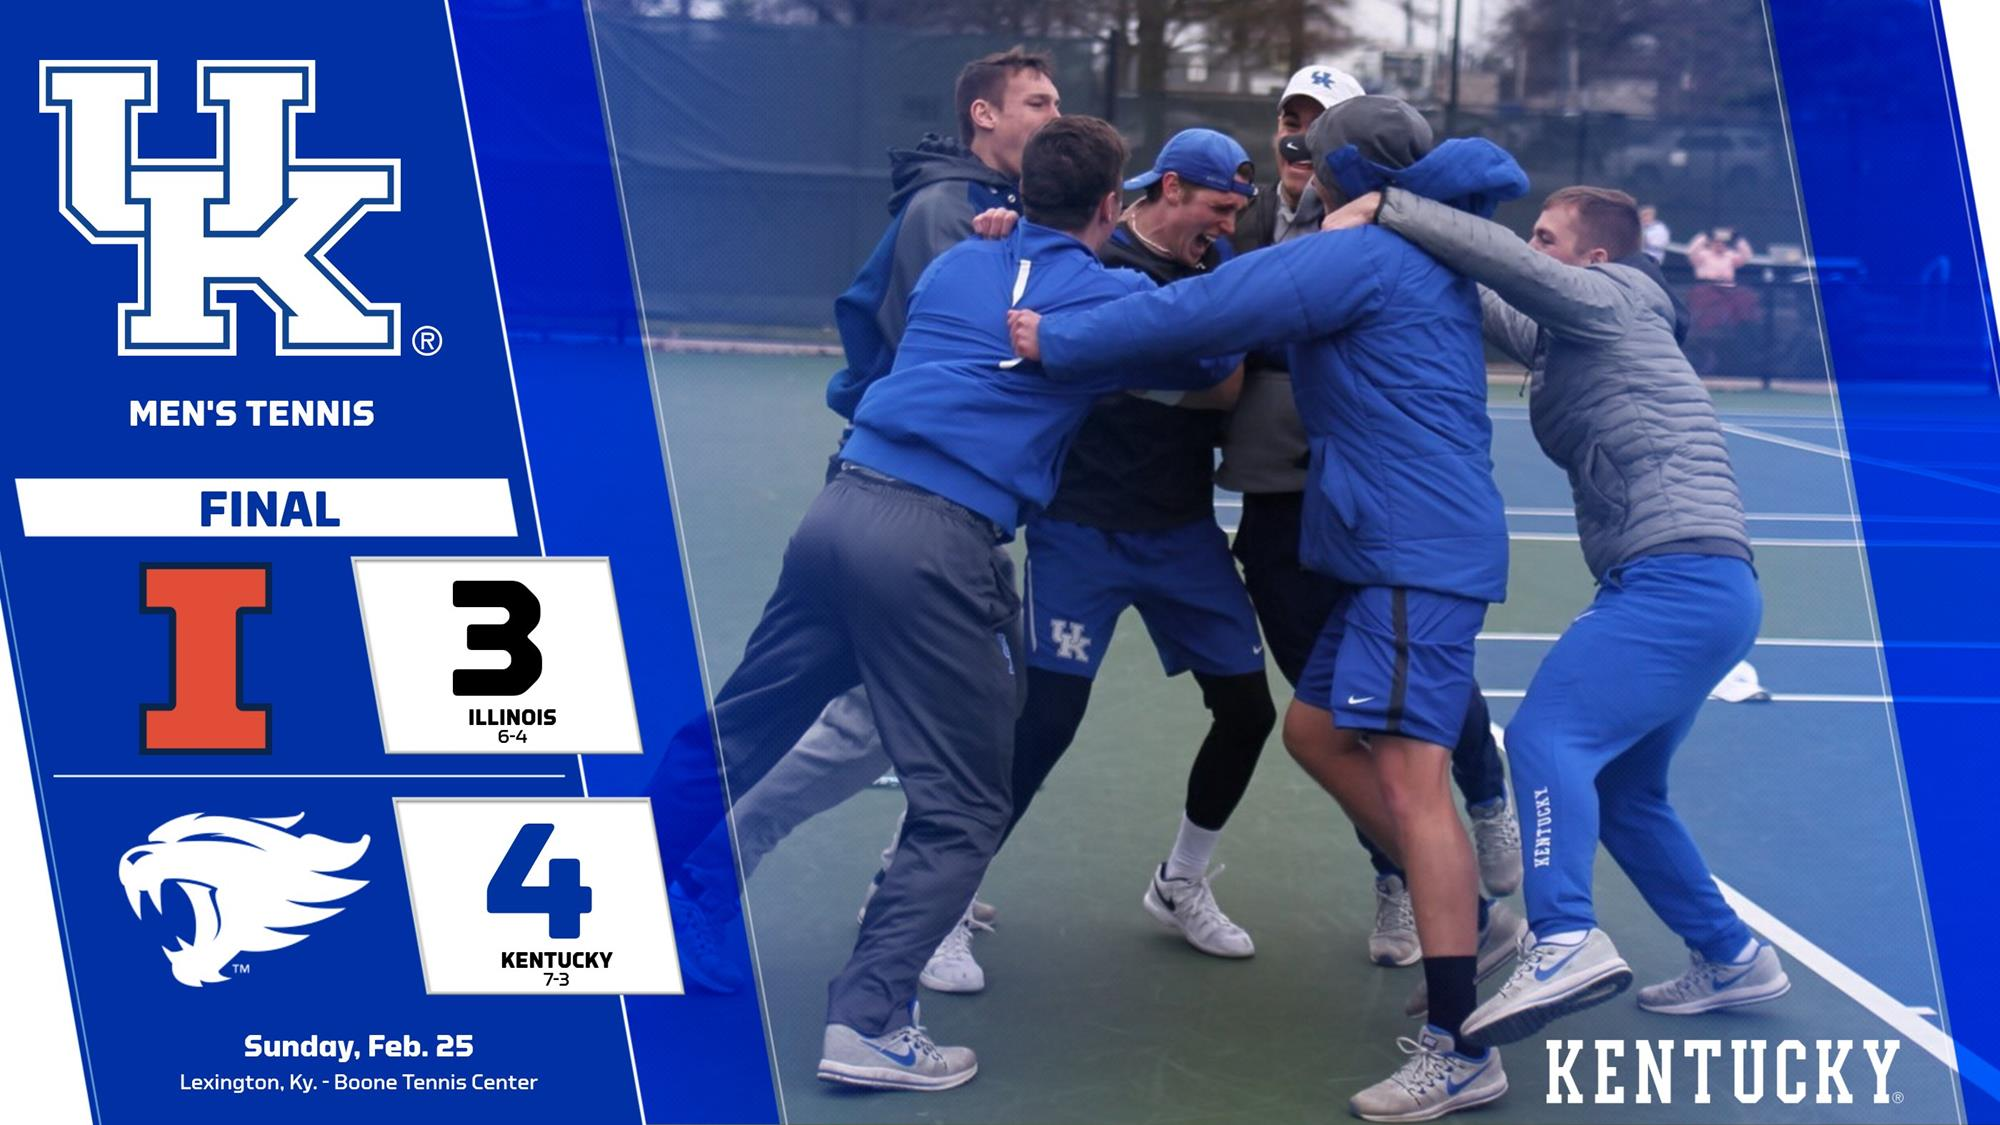 Kentucky Comes From Behind to Beat No. 7 Illinois, 4-3